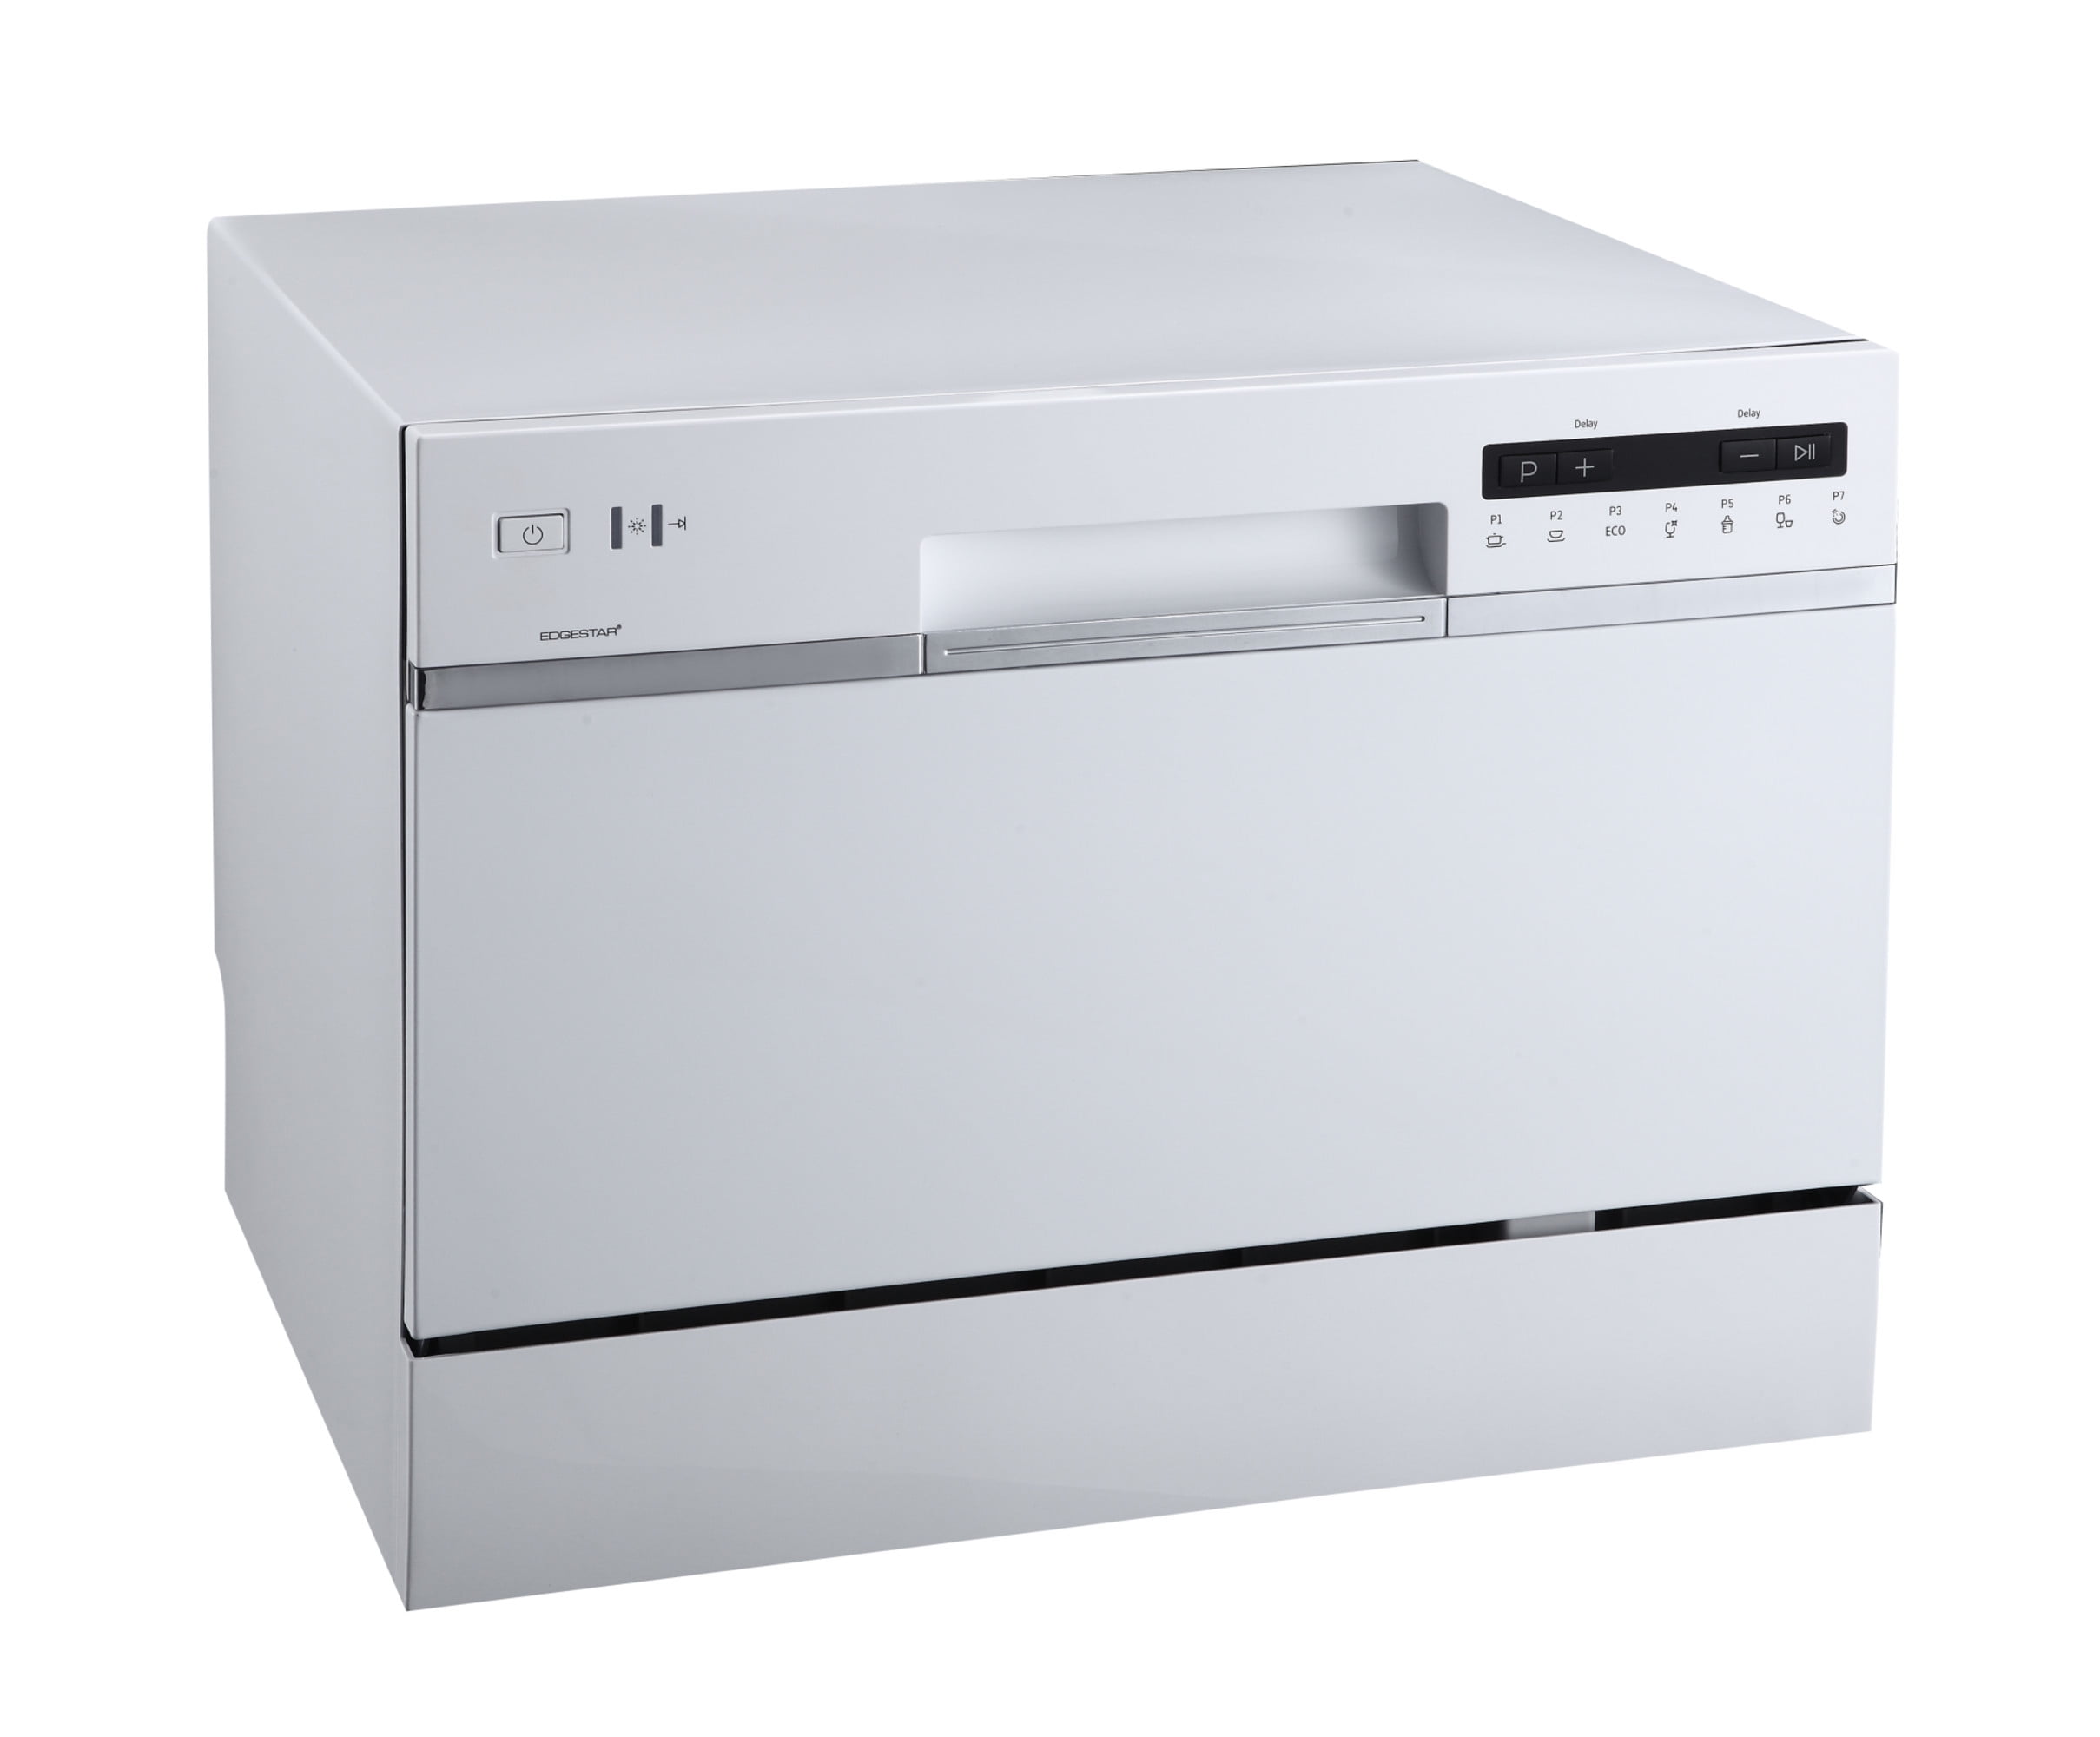 The Best Countertop Dishwasher Of 2022 